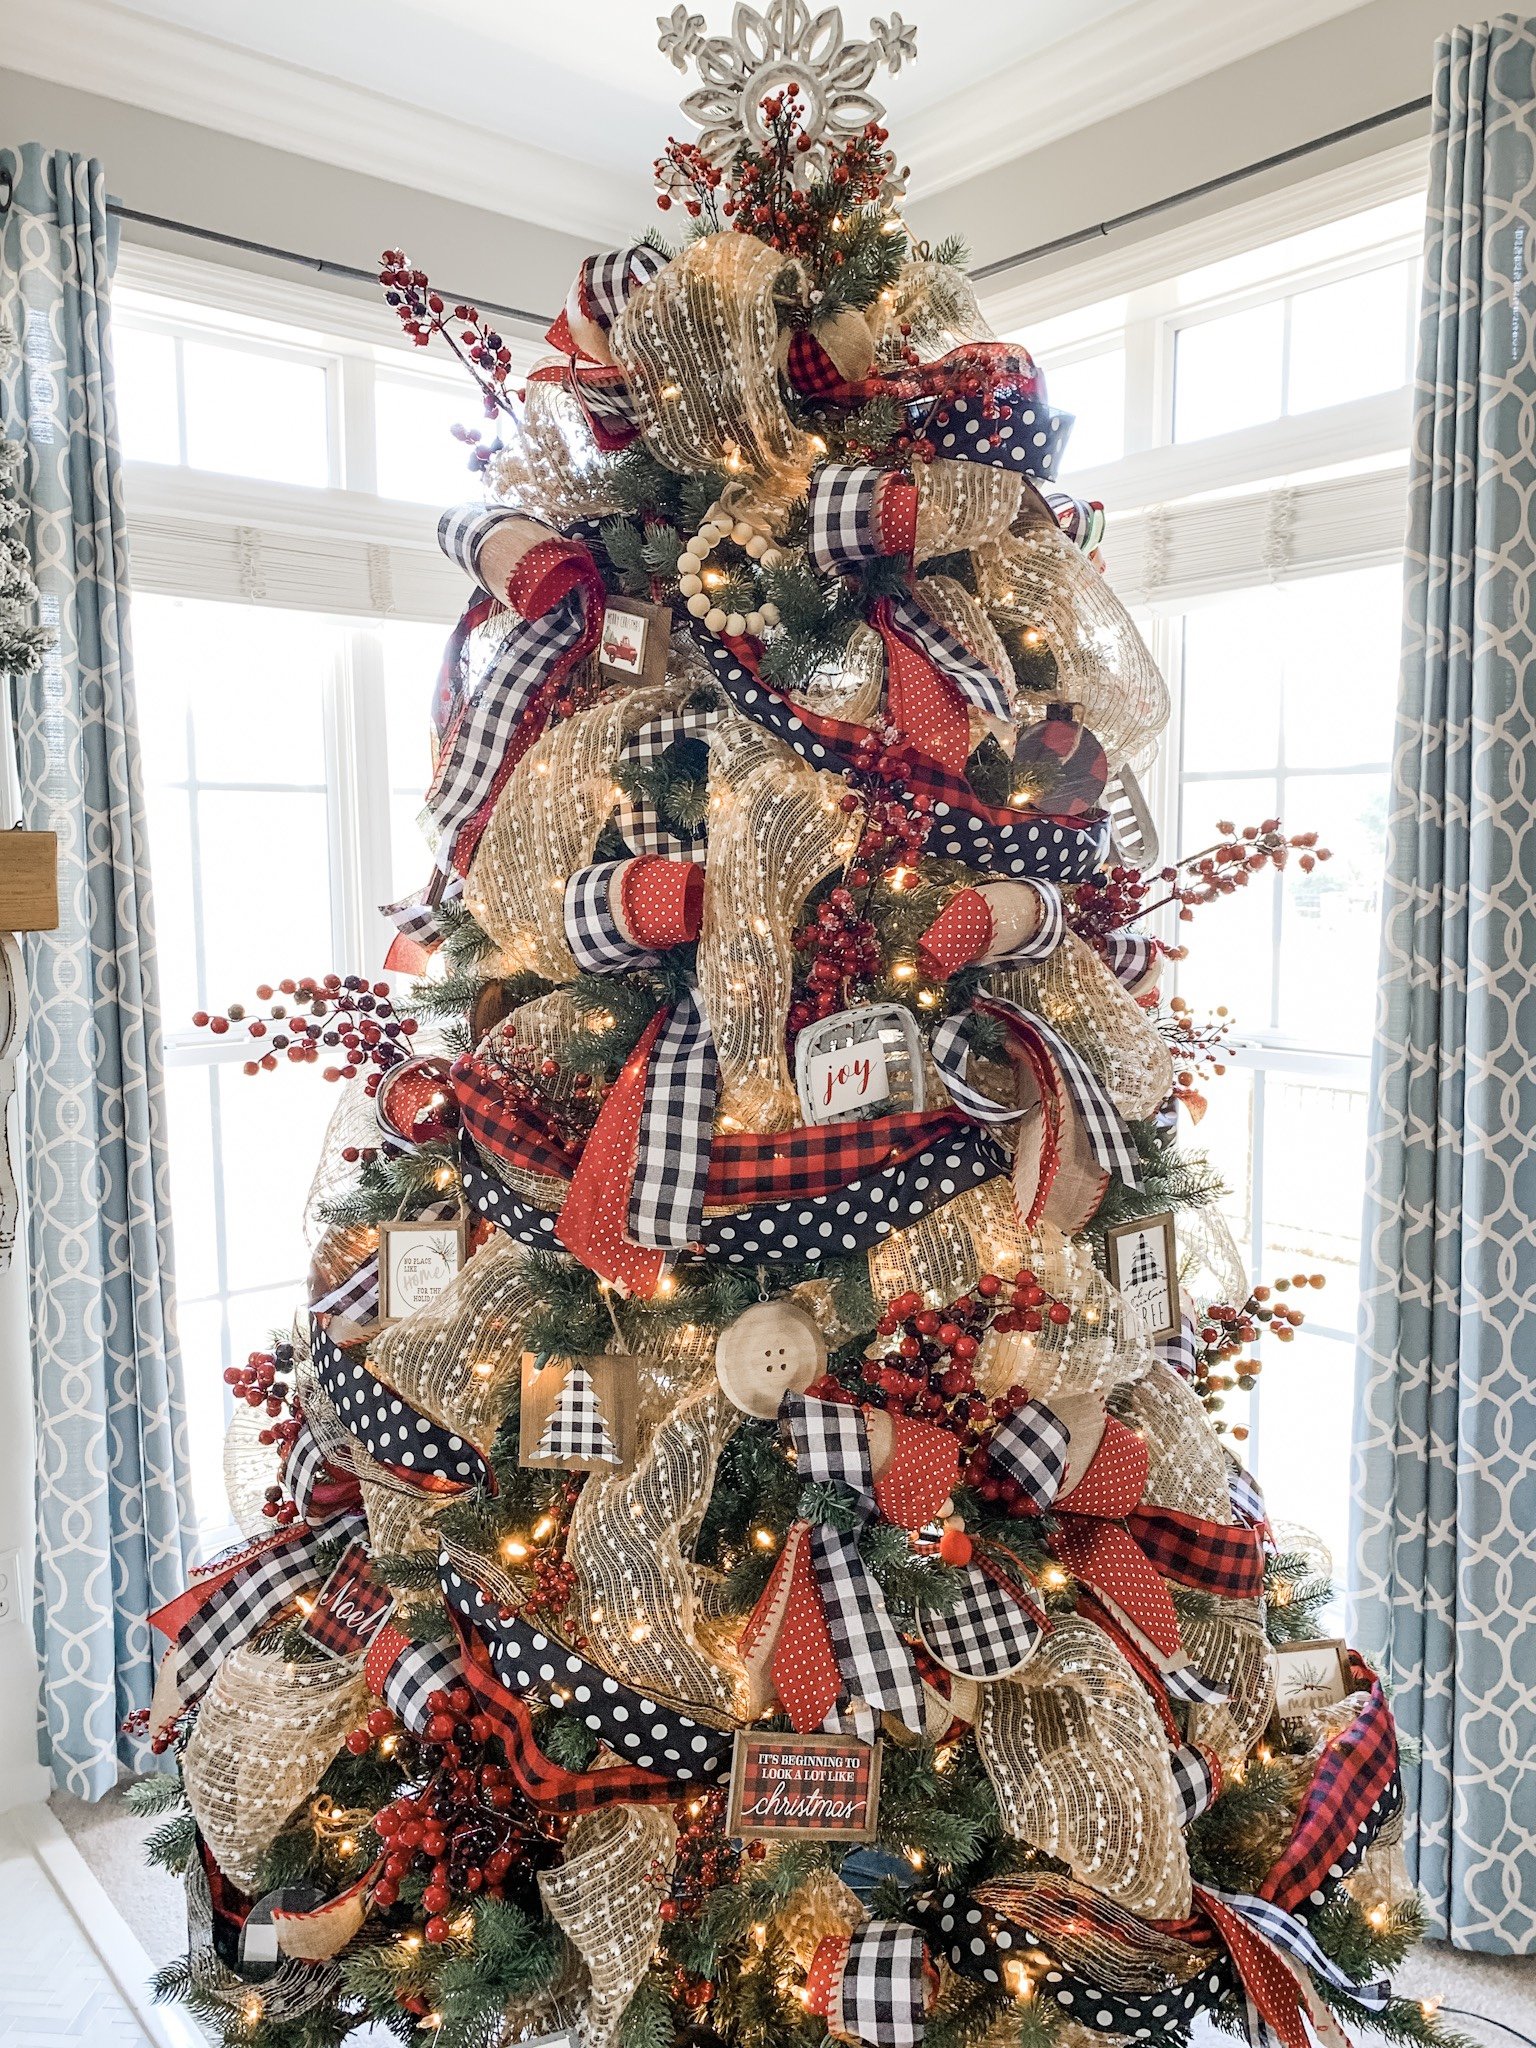 How to Decorate a Christmas Tree With Ribbon